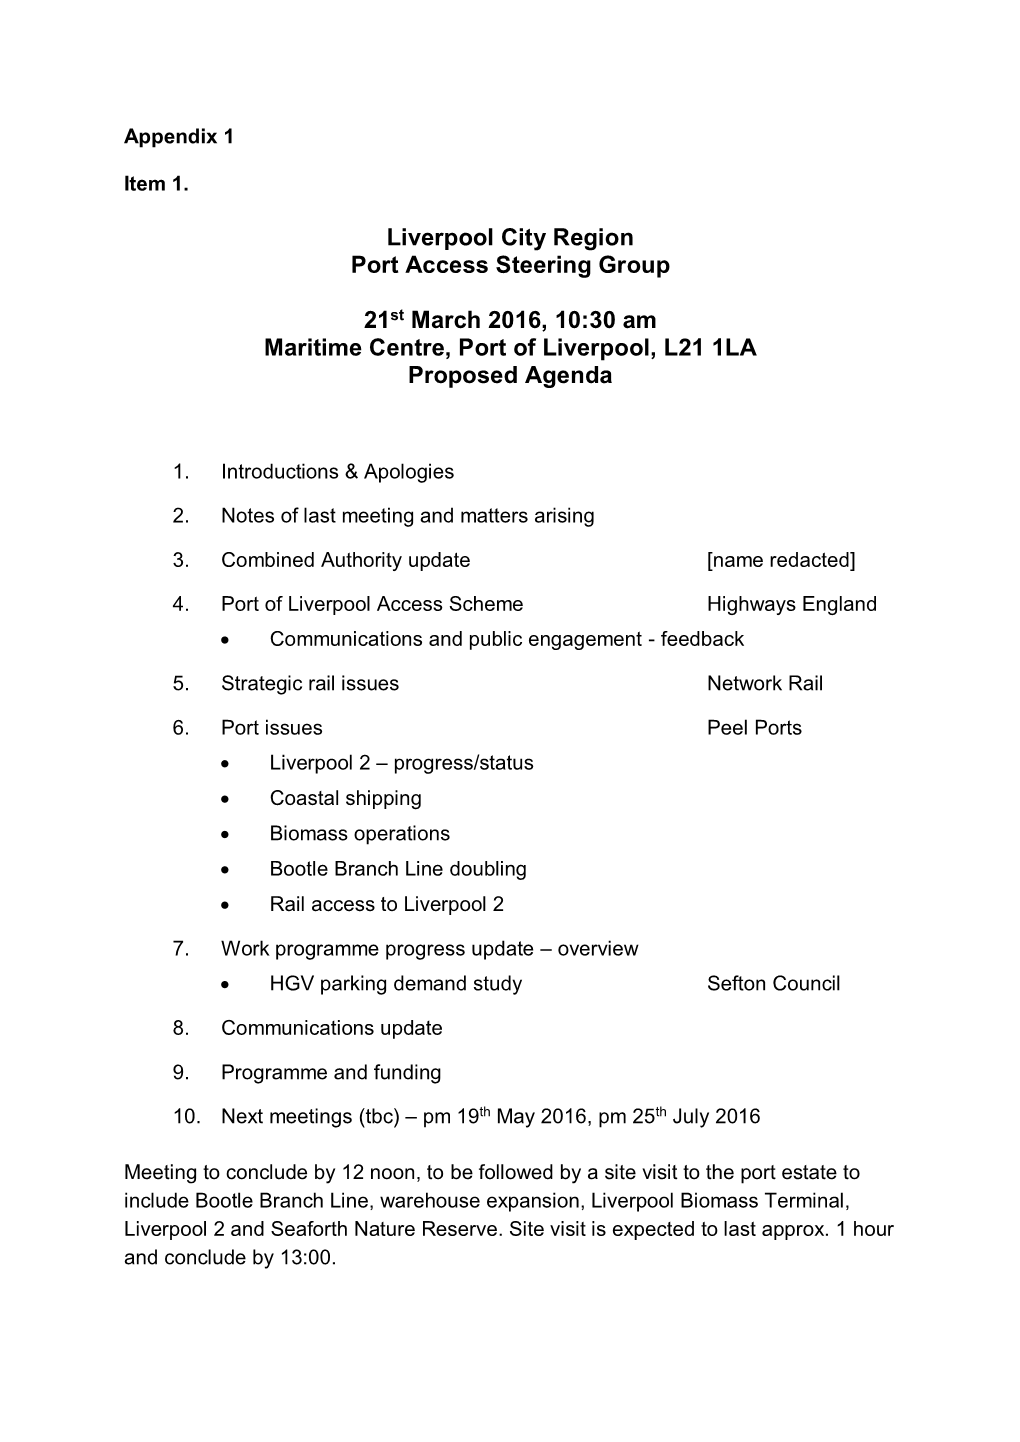 Liverpool City Region Port Access Steering Group 21St March 2016